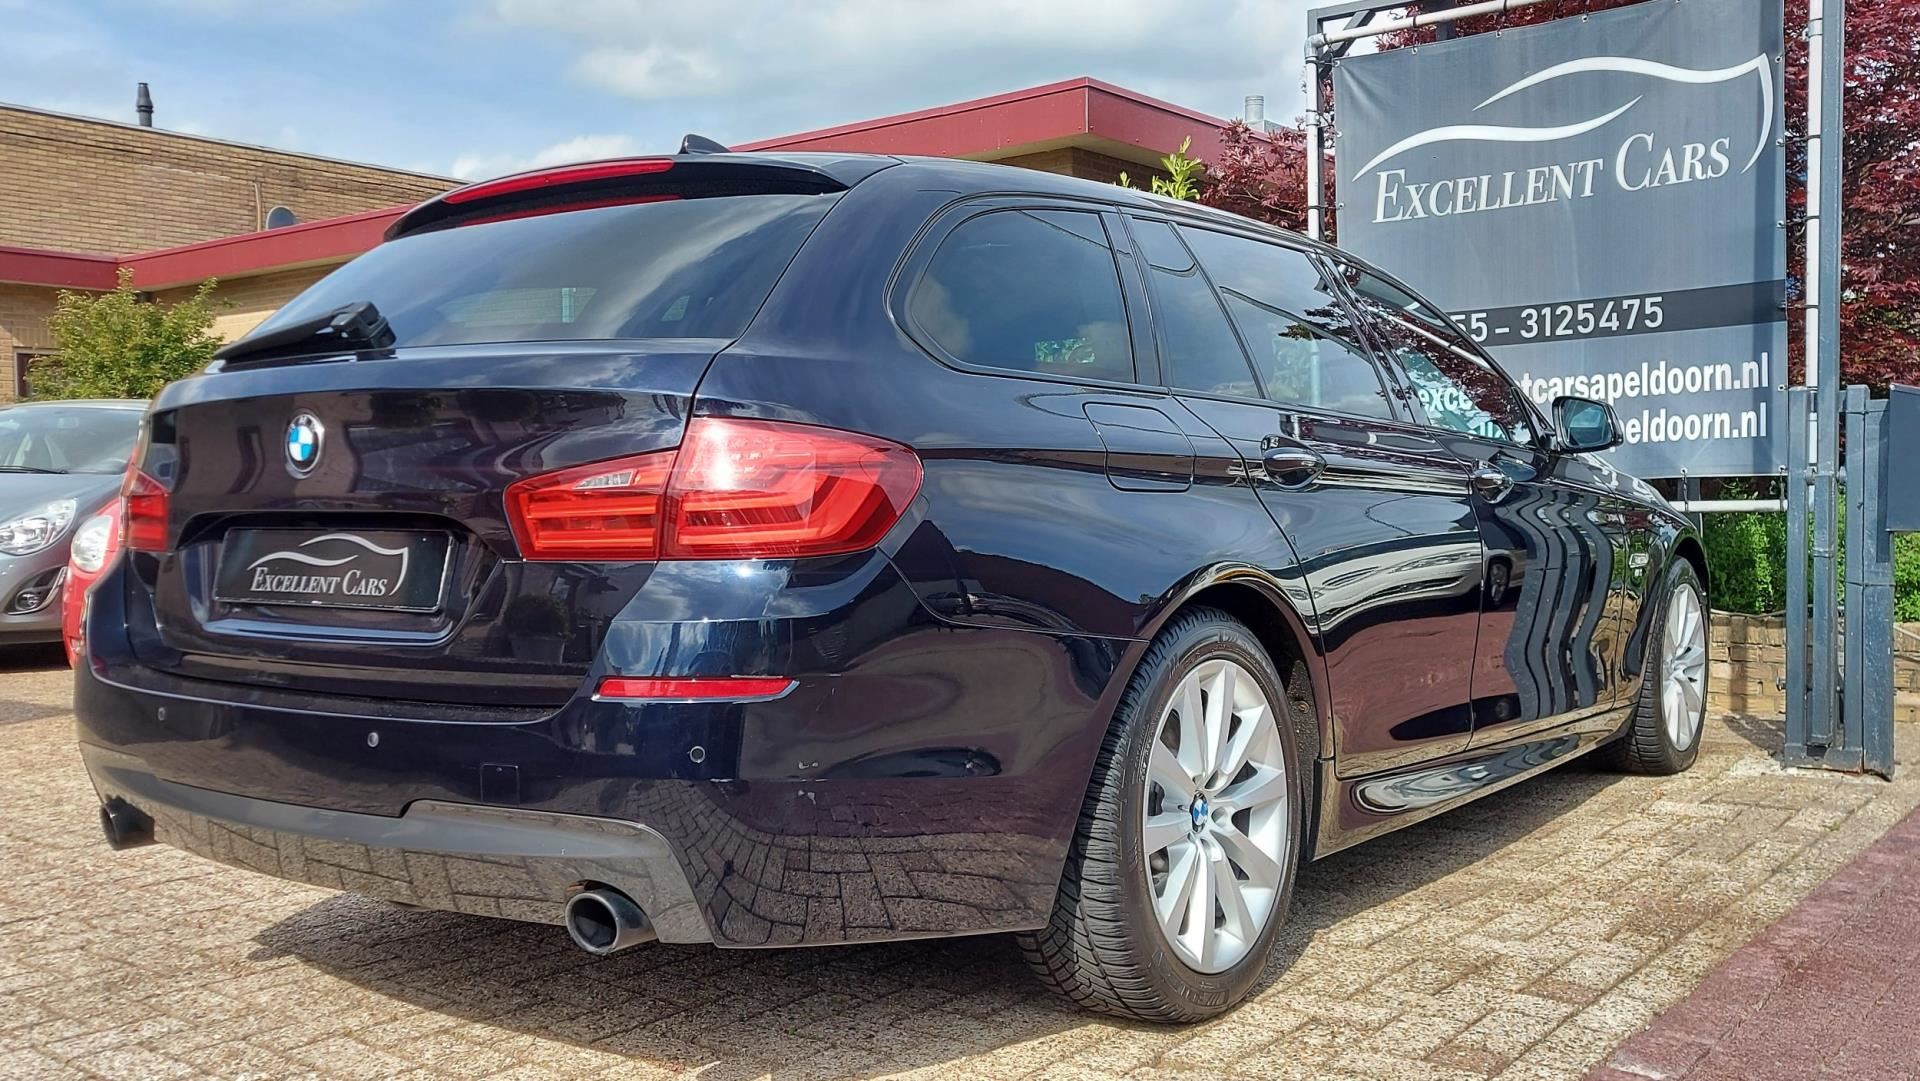 BMW 5-serie Touring occasion - Excellent Cars